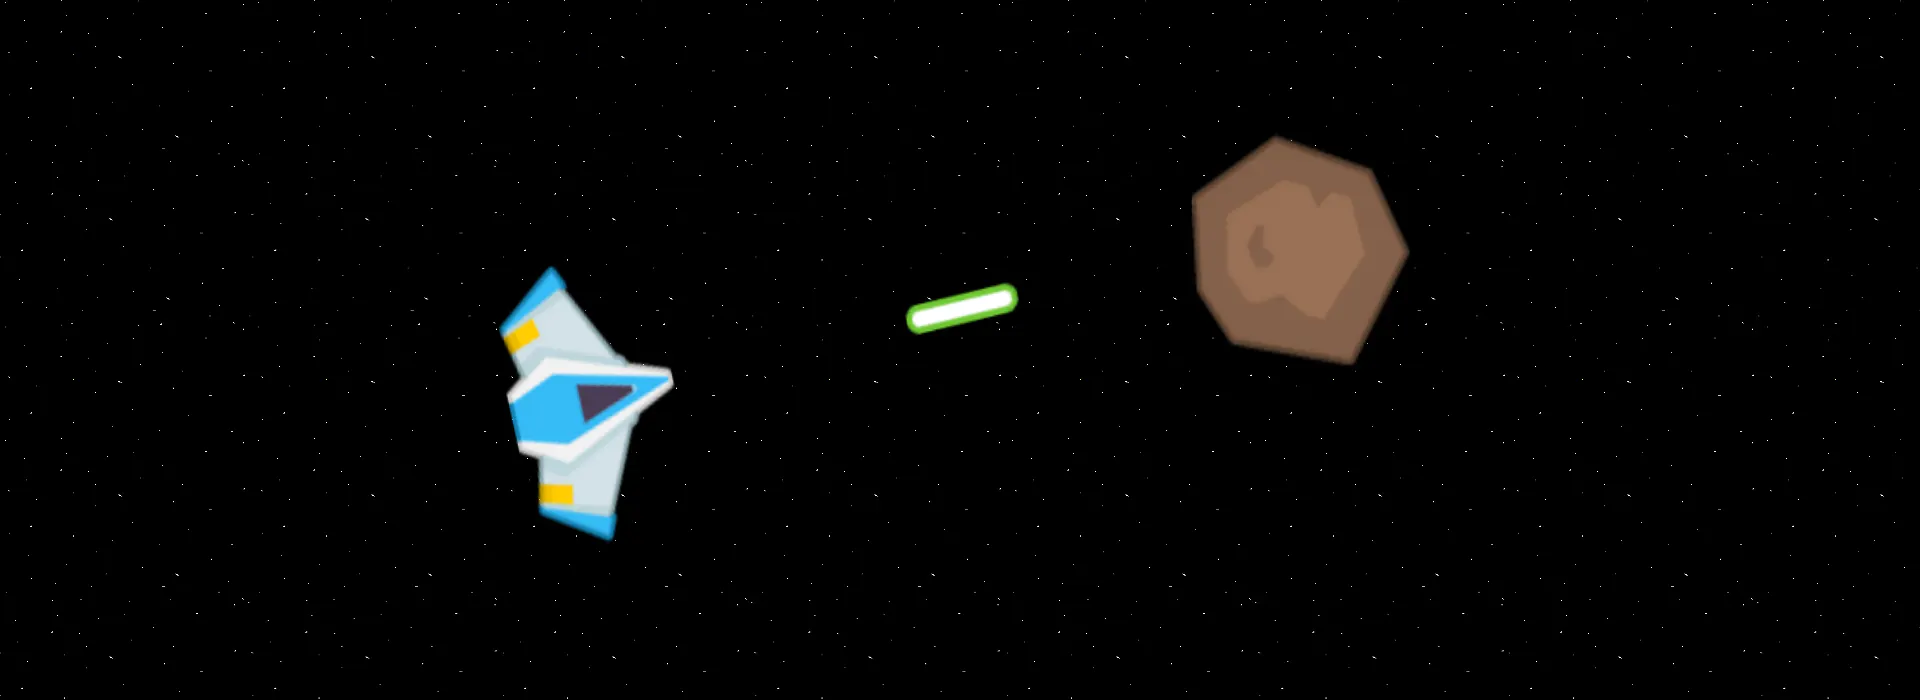 My first video game - a clone of asteroids